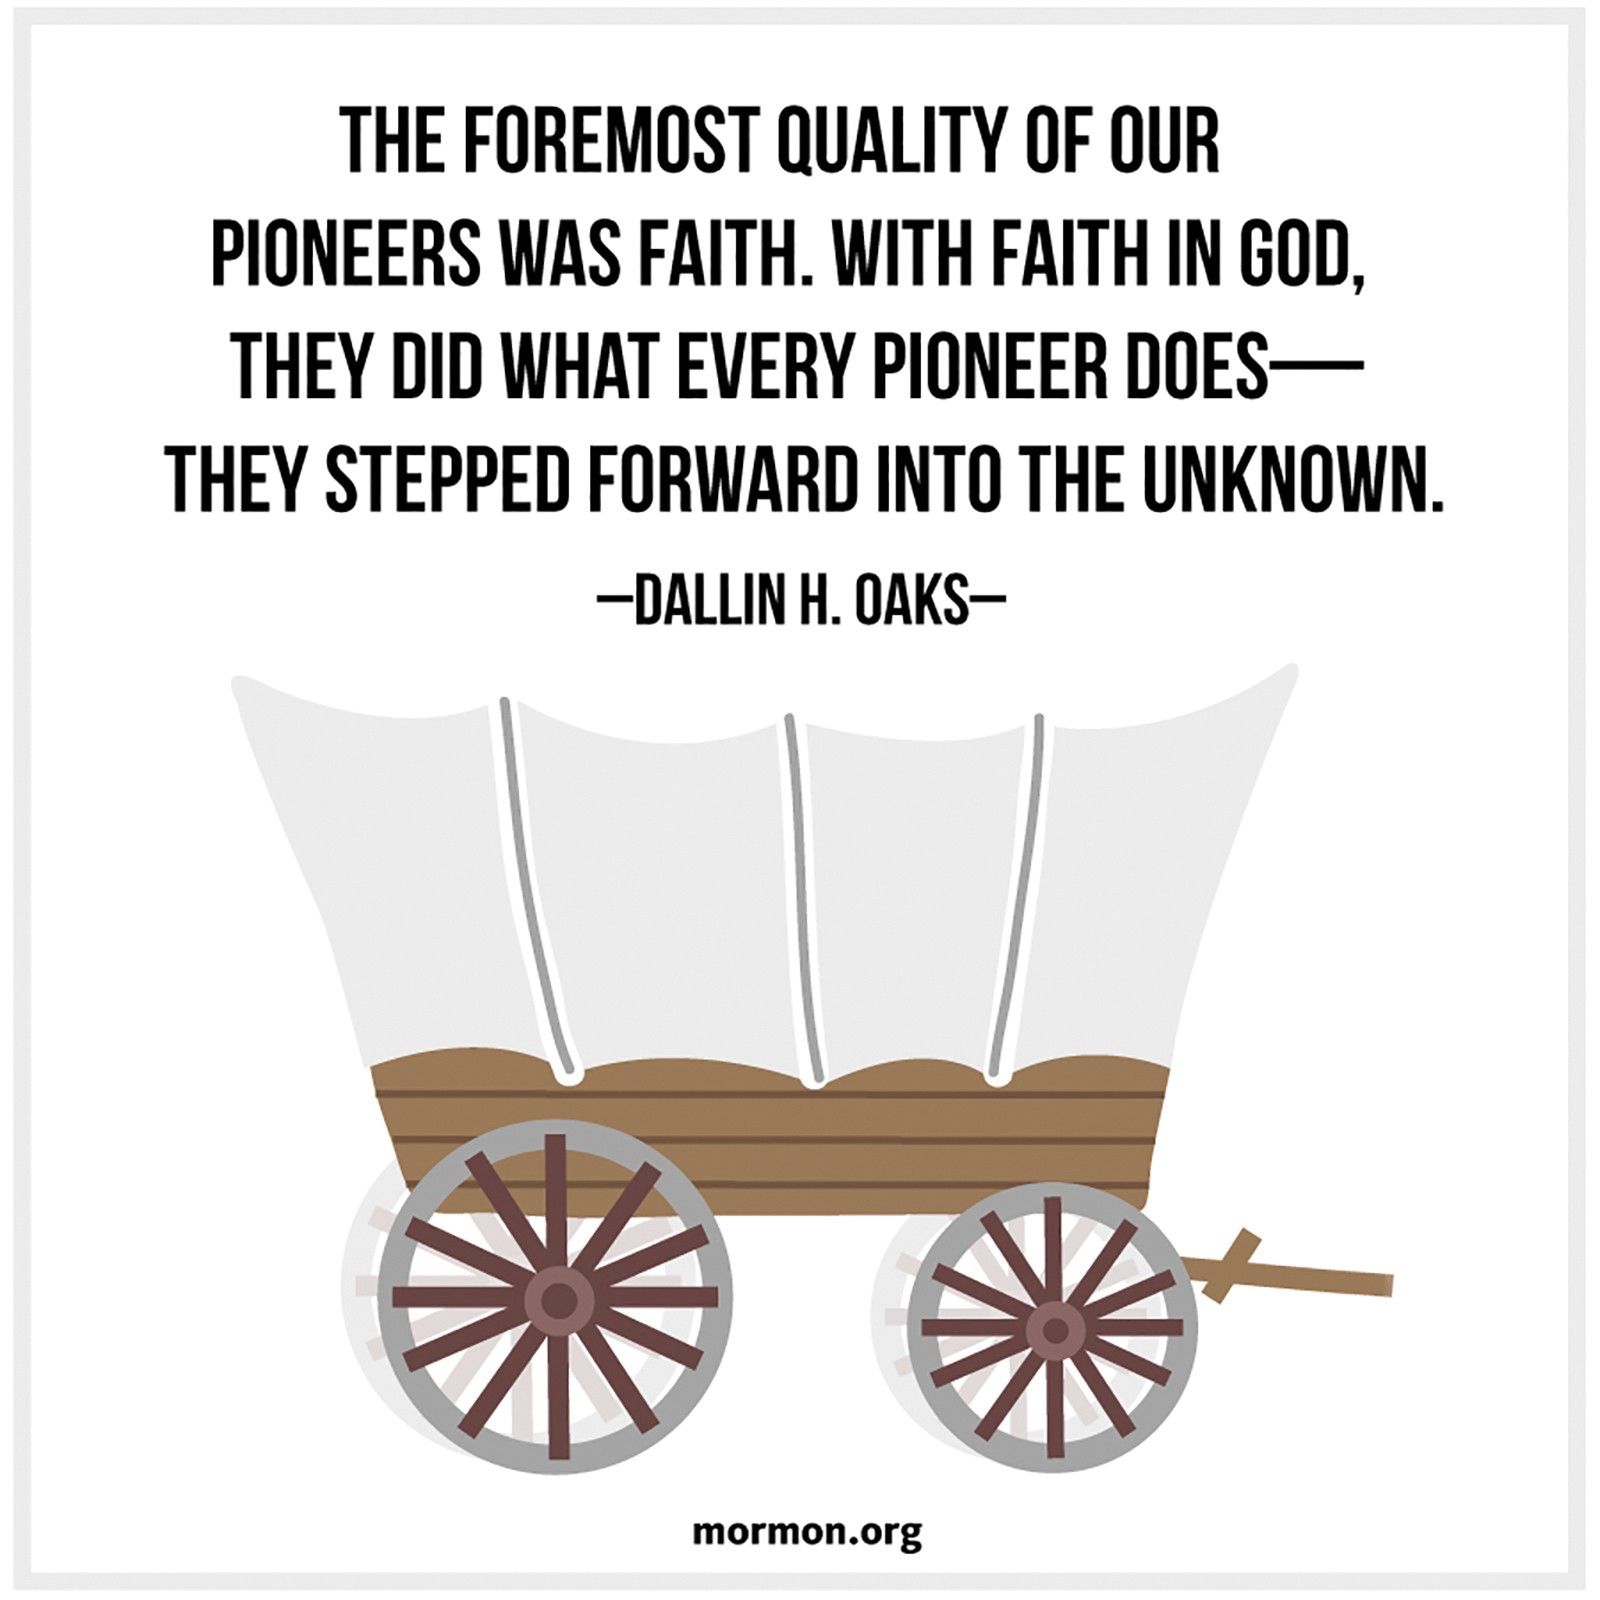 “The foremost quality of our pioneers was faith. With faith in God, they did what every pioneer does—they stepped forward into the unknown.”—Elder Dallin H. Oaks, “Following the Pioneers”